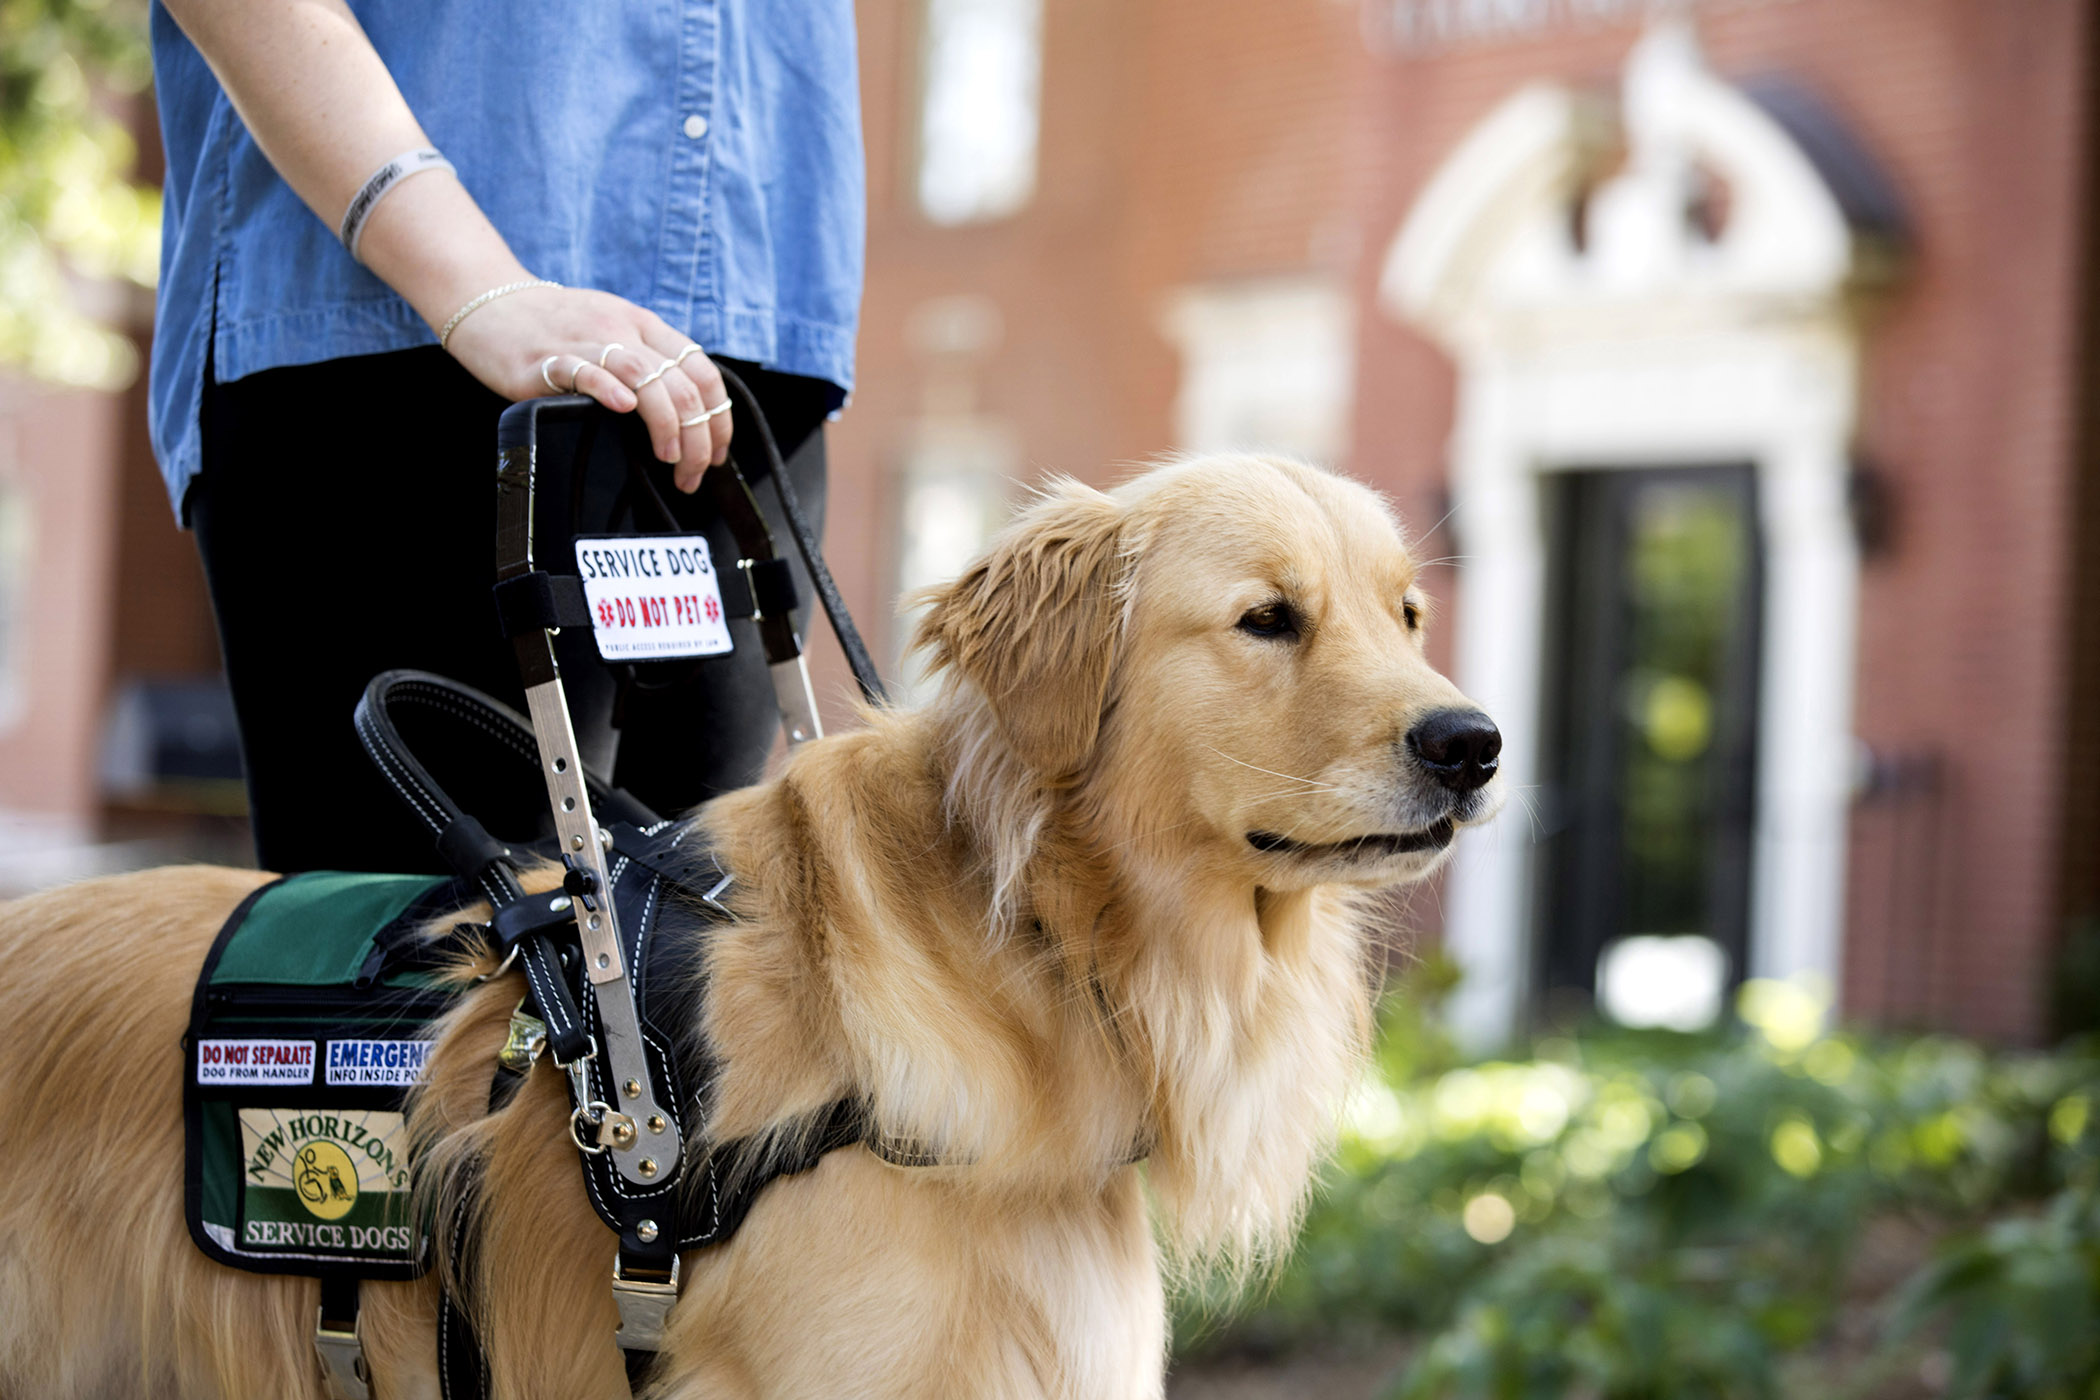 Service dog aids student's mobility